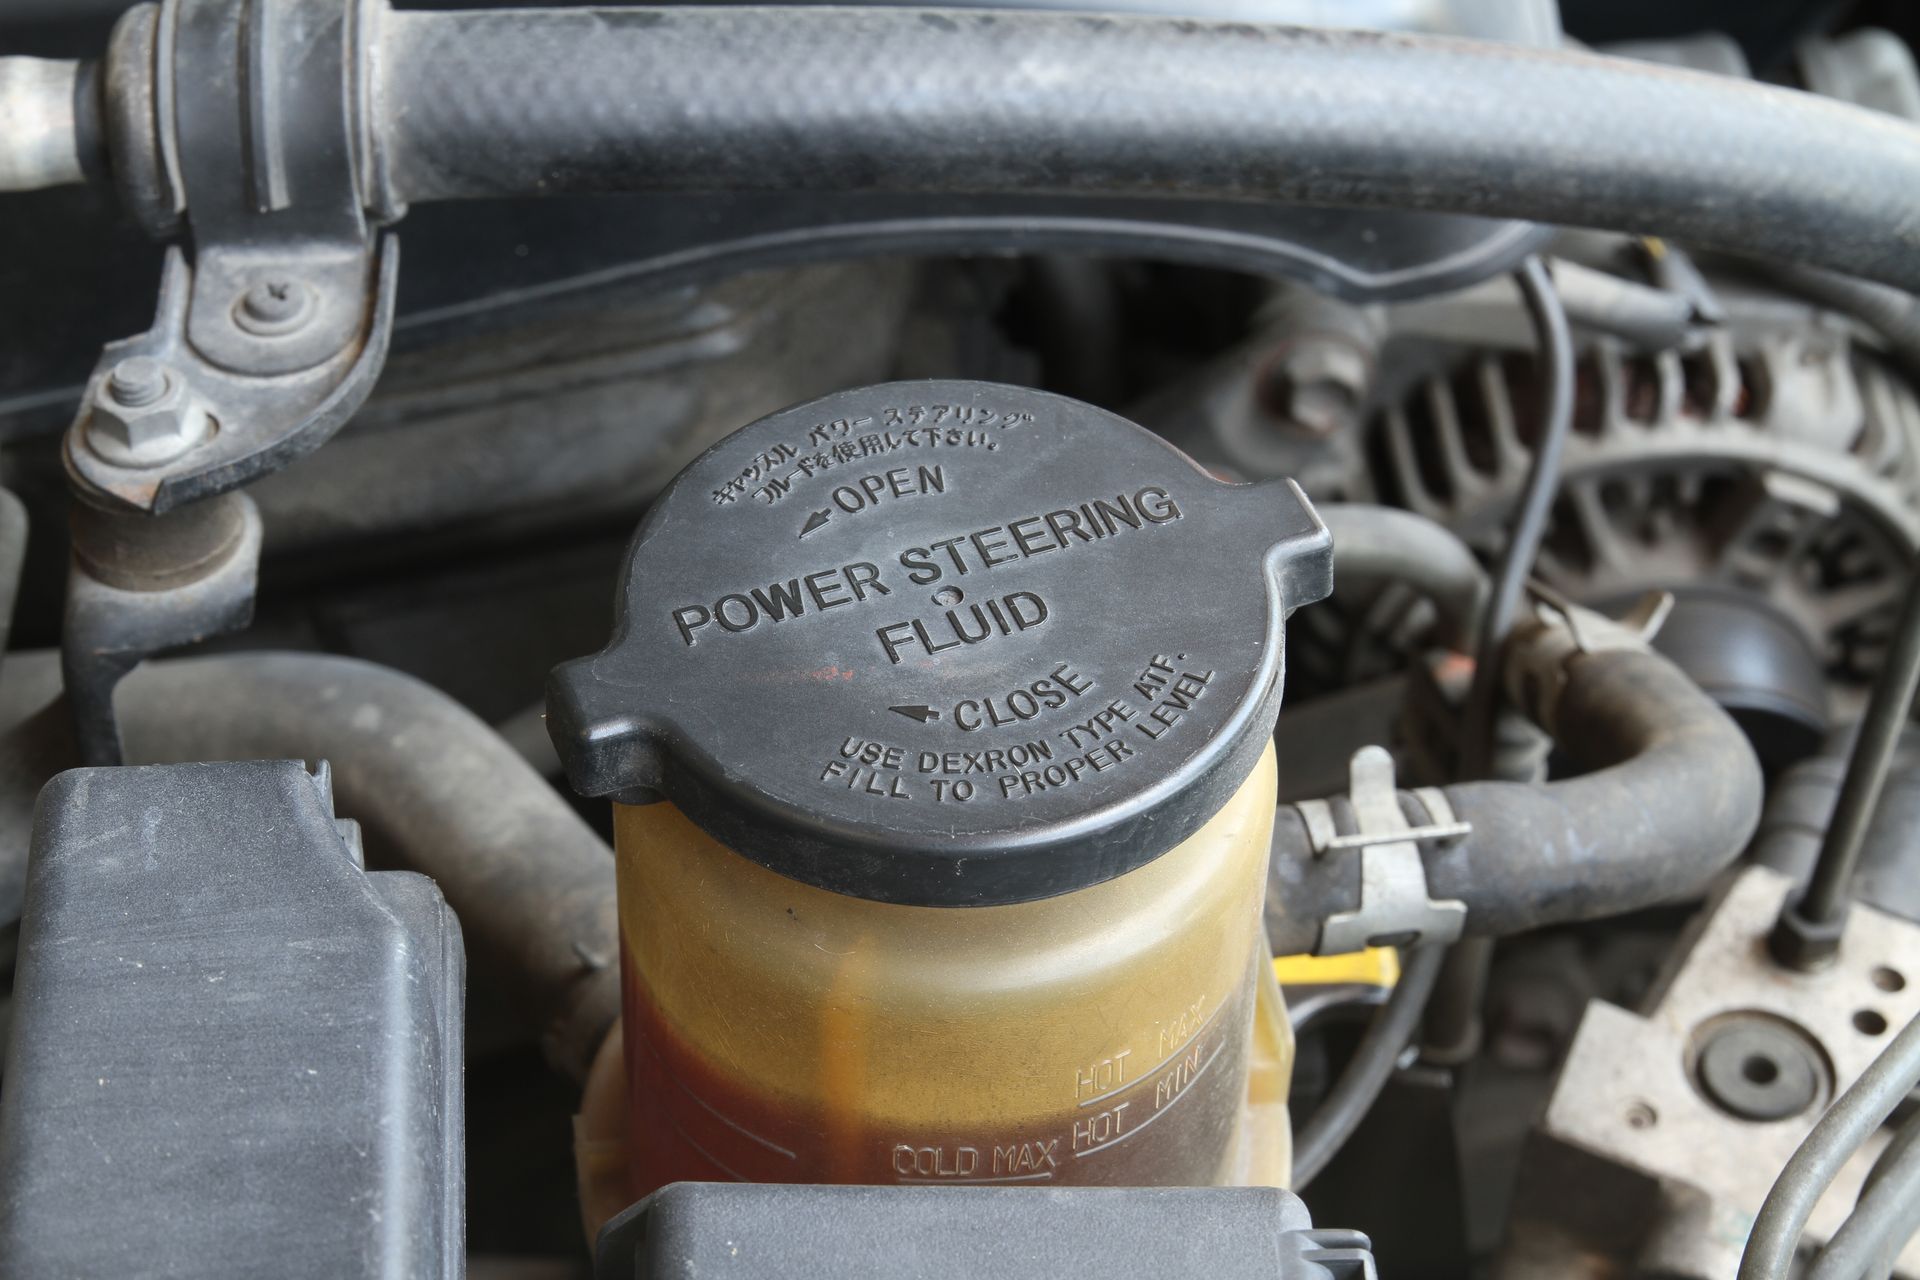 a close-up of a power steering fluid container in a car engine